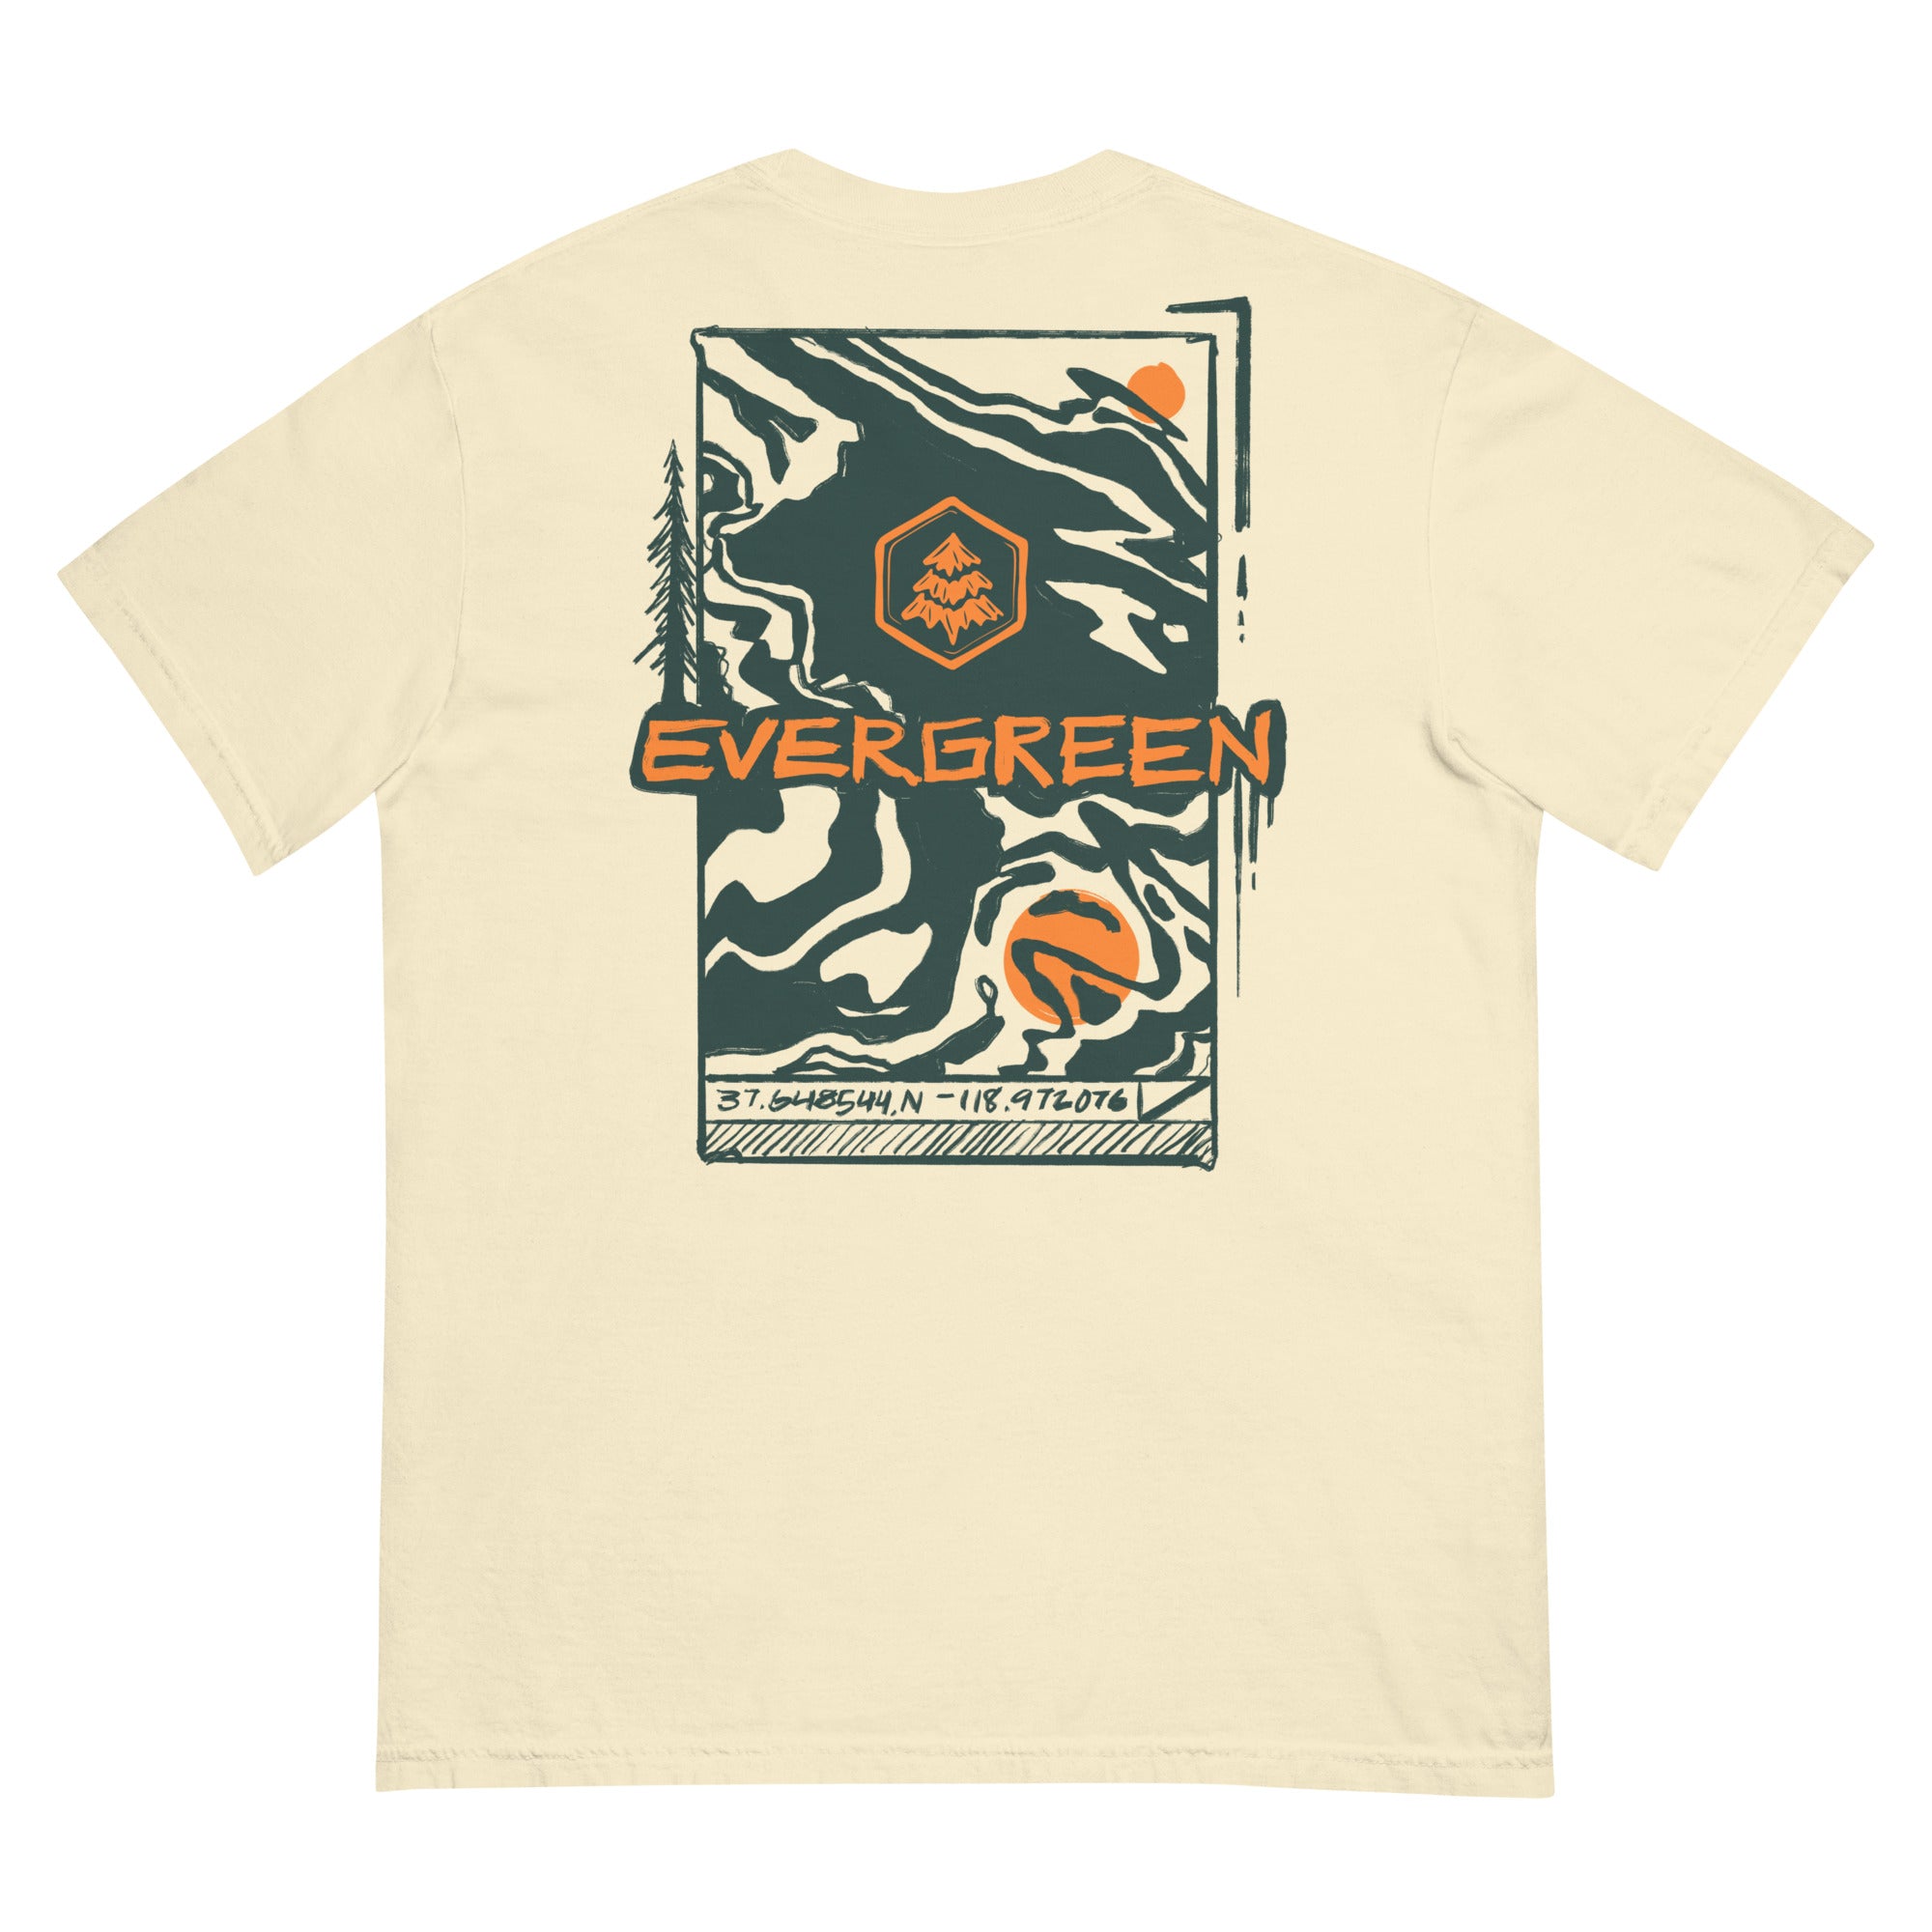 Evergreen Graphic Tee - Sky Edition - Heavy Weight Cotton